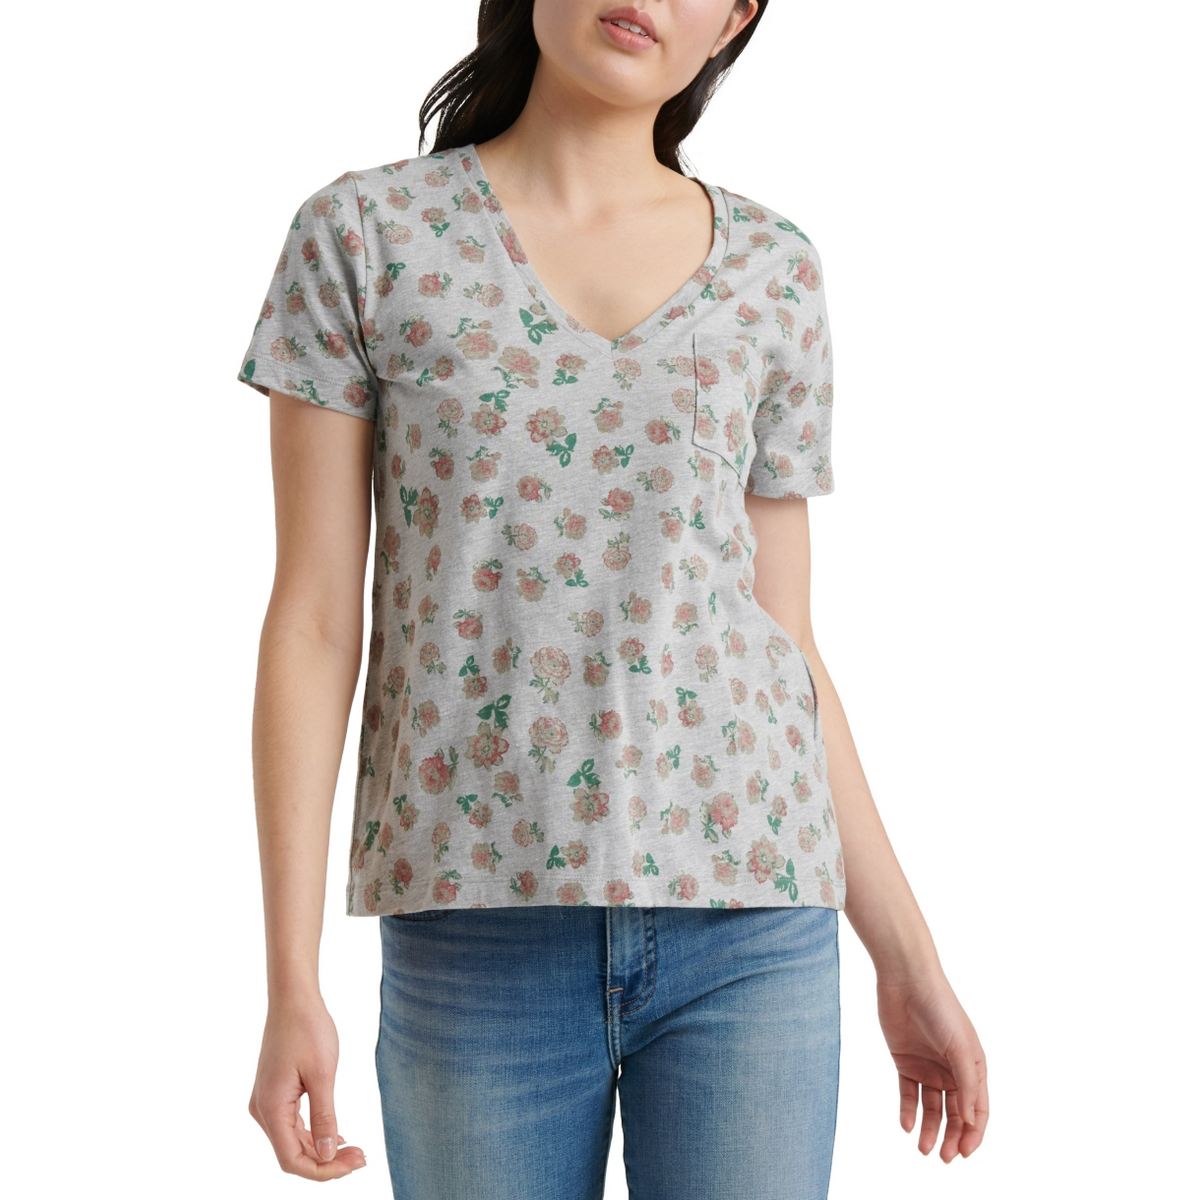 LUCKY BRAND NEW Women's Heather Grey Floral V-neck Tee Casual